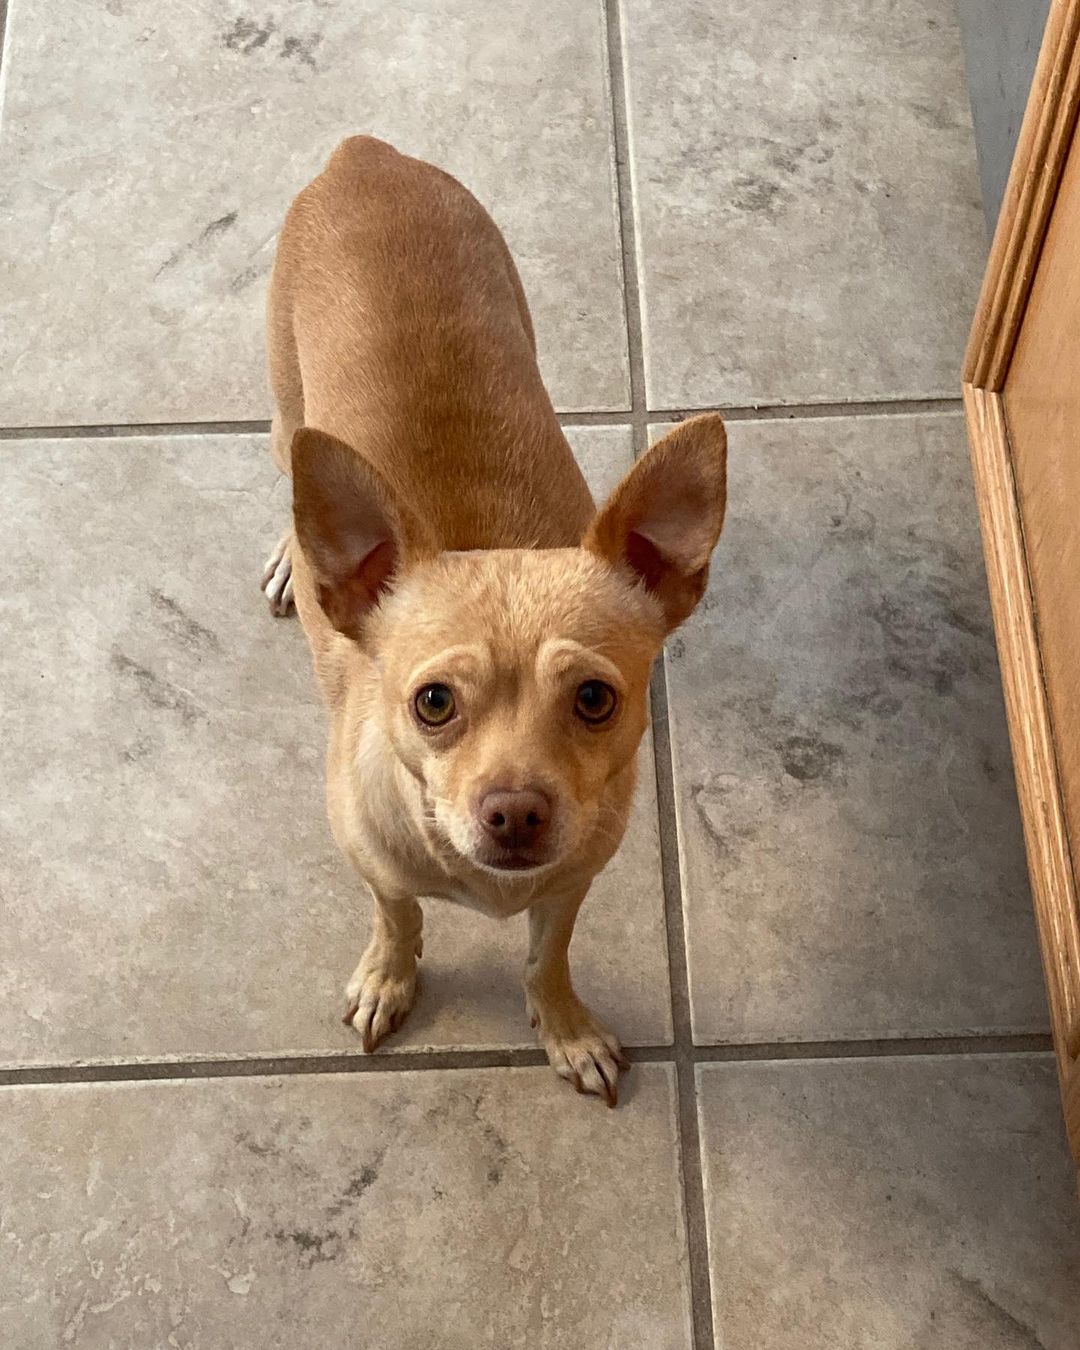 Hi, it’s me, Ronnie! I get that everyone loves a doodle, but can I just say, look at a me, the ten pound 2 year old chi also living at casa Ana.  I am good with dogs, play time, and snuggles.  I have lived with kids and if I take a little to warm up to strangers, once you prove you mean no harm, I’m yours for life.  <a target='_blank' href='https://www.instagram.com/explore/tags/adoptdontshop/'>#adoptdontshop</a> <a target='_blank' href='https://www.instagram.com/explore/tags/fosteringsaveslives/'>#fosteringsaveslives</a> <a target='_blank' href='https://www.instagram.com/explore/tags/fostermum/'>#fostermum</a> <a target='_blank' href='https://www.instagram.com/explore/tags/chiuahuasofinstagram/'>#chiuahuasofinstagram</a> <a target='_blank' href='https://www.instagram.com/explore/tags/rescuechi/'>#rescuechi</a> <a target='_blank' href='https://www.instagram.com/explore/tags/sparkyandthegang/'>#sparkyandthegang</a> <a target='_blank' href='https://www.instagram.com/explore/tags/imcute/'>#imcute</a> <a target='_blank' href='https://www.instagram.com/explore/tags/pleaseadoptme/'>#pleaseadoptme</a>